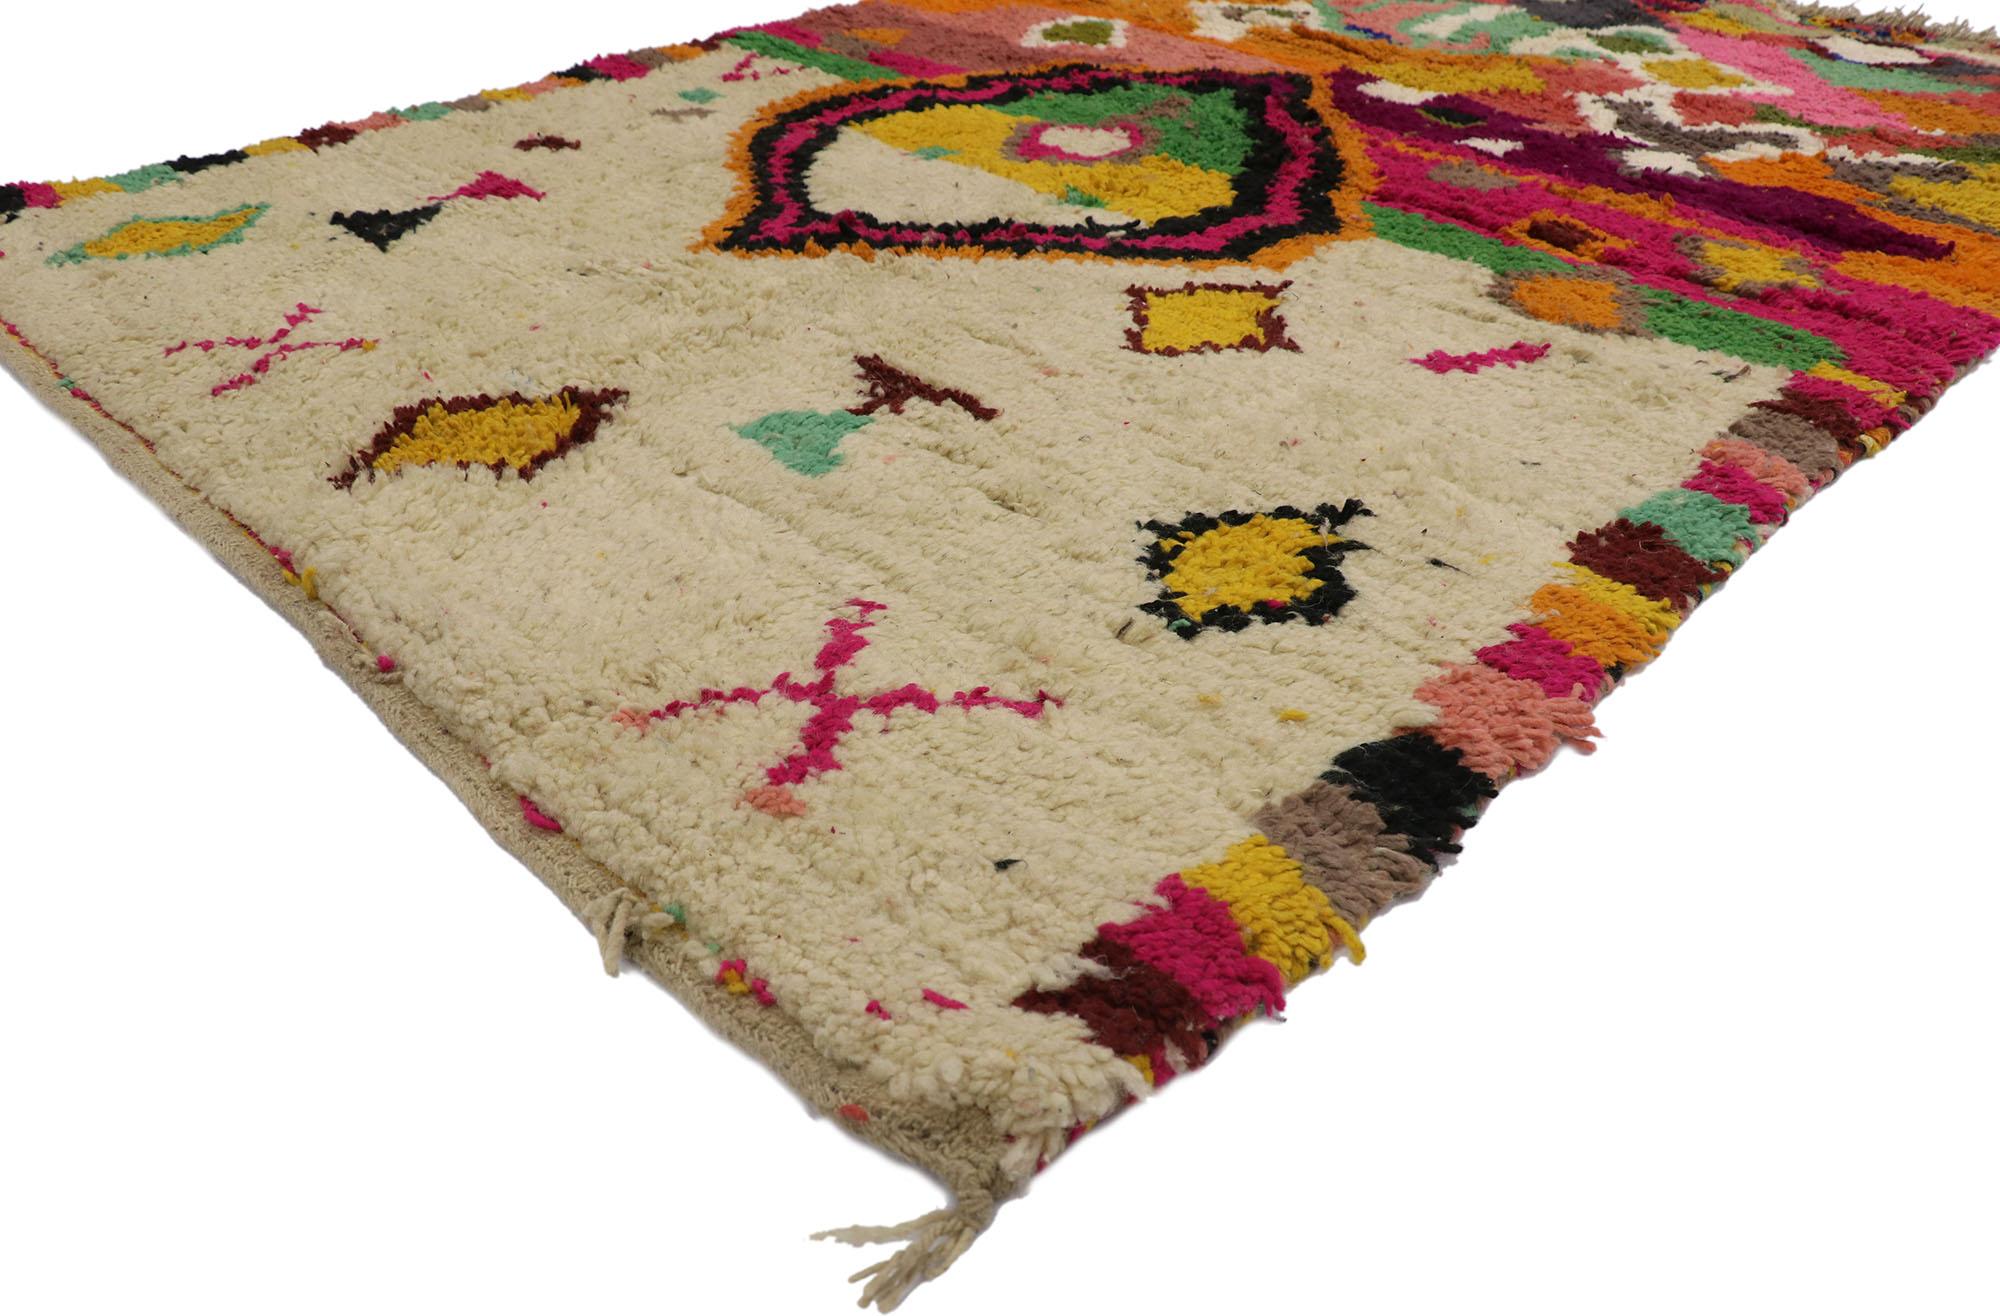 21653 Vintage Berber Boujad Moroccan rug with Abstract Expressionism 05'03 x 07'09. Showcasing a bold expressive design in lively colors, incredible detail and texture, this hand knotted wool vintage Berber Boujad Moroccan rug is a captivating